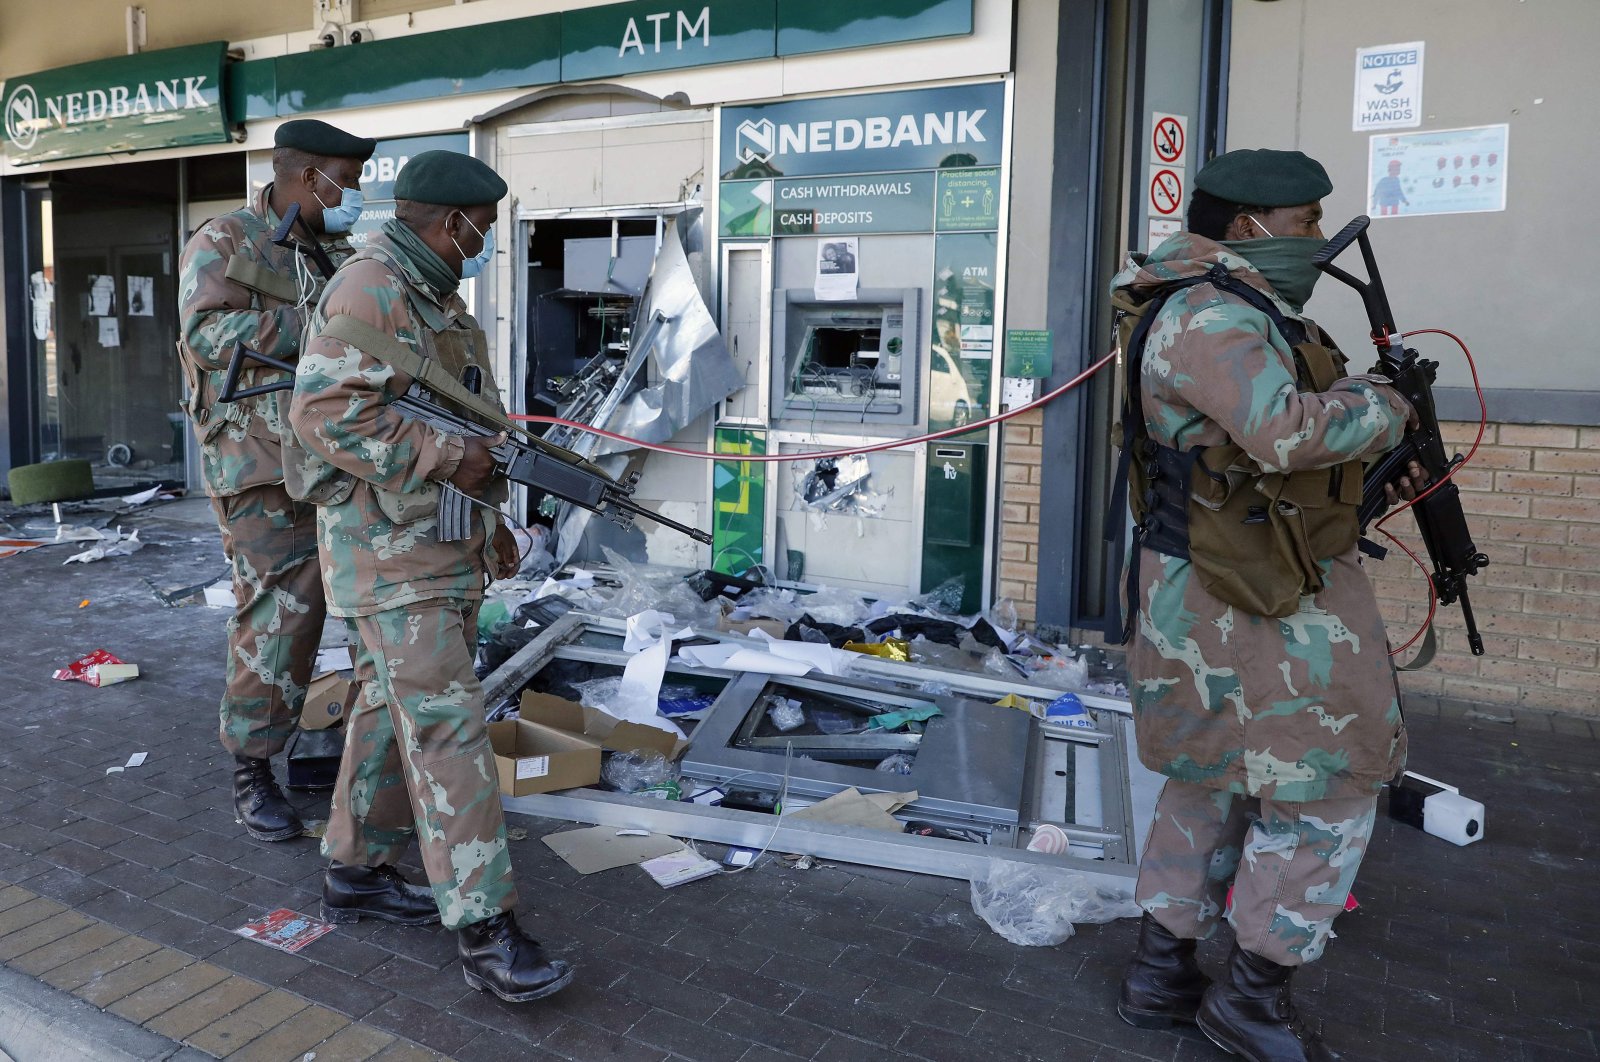 Members of the South African Defence Force walk past an automated teller machine as they patrol the looted Diepkloof Square area in Soweto, Johannesburg, South Africa, July 13, 2021. (AFP File Photo)